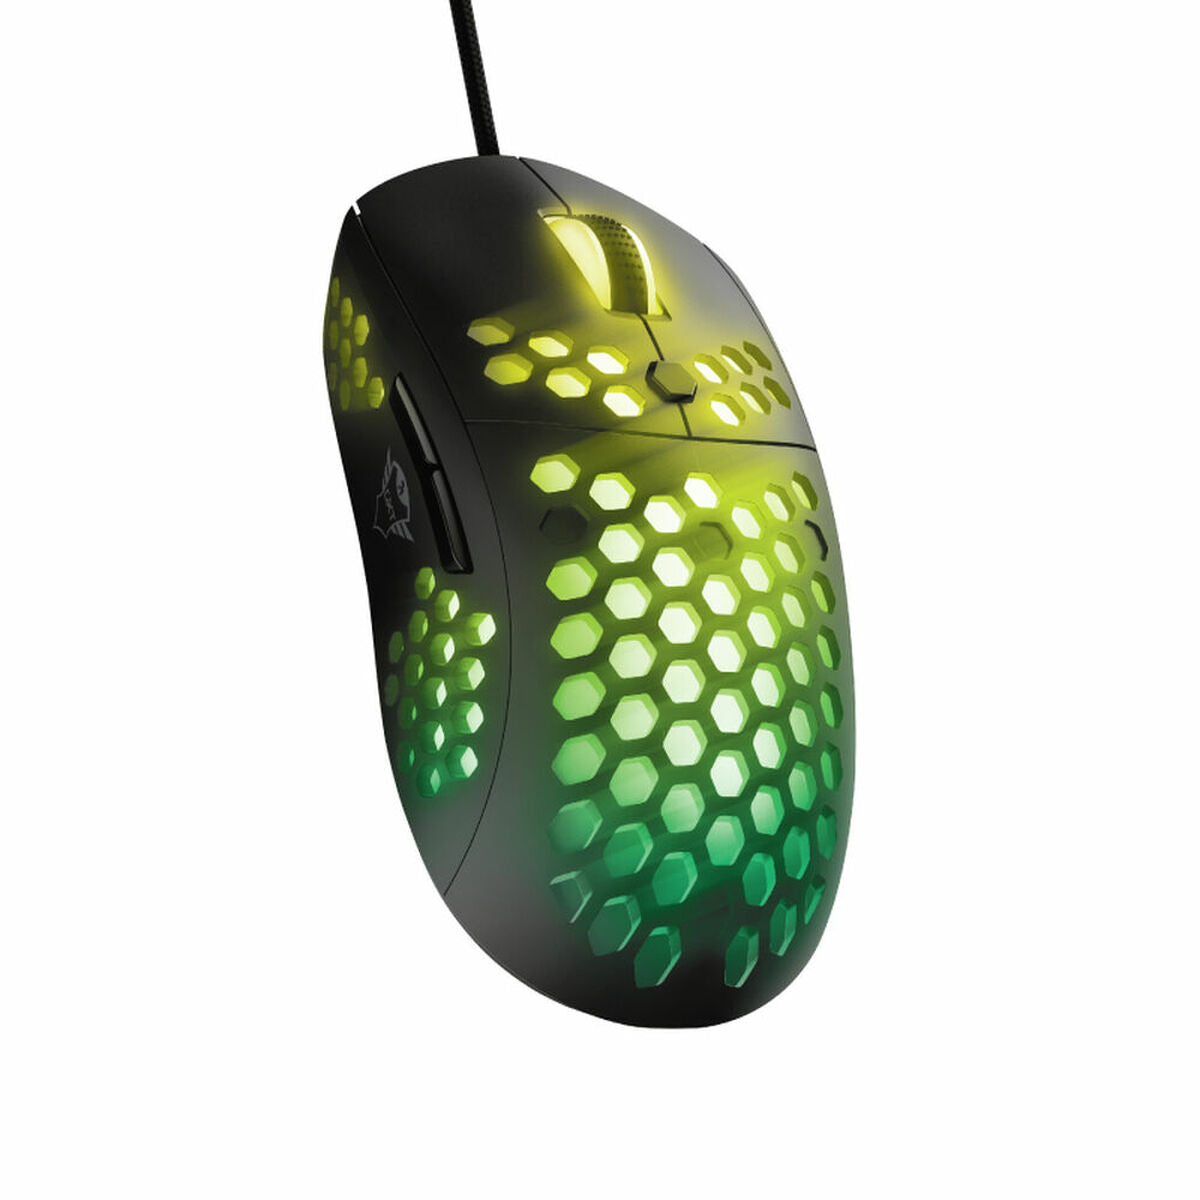 Mouse Trust GXT960, Trust, Computing, Accessories, mouse-trust-gxt960, Brand_Trust, category-reference-2609, category-reference-2642, category-reference-2656, category-reference-t-19685, category-reference-t-19908, category-reference-t-21353, computers / peripherals, Condition_NEW, office, Price_20 - 50, RiotNook